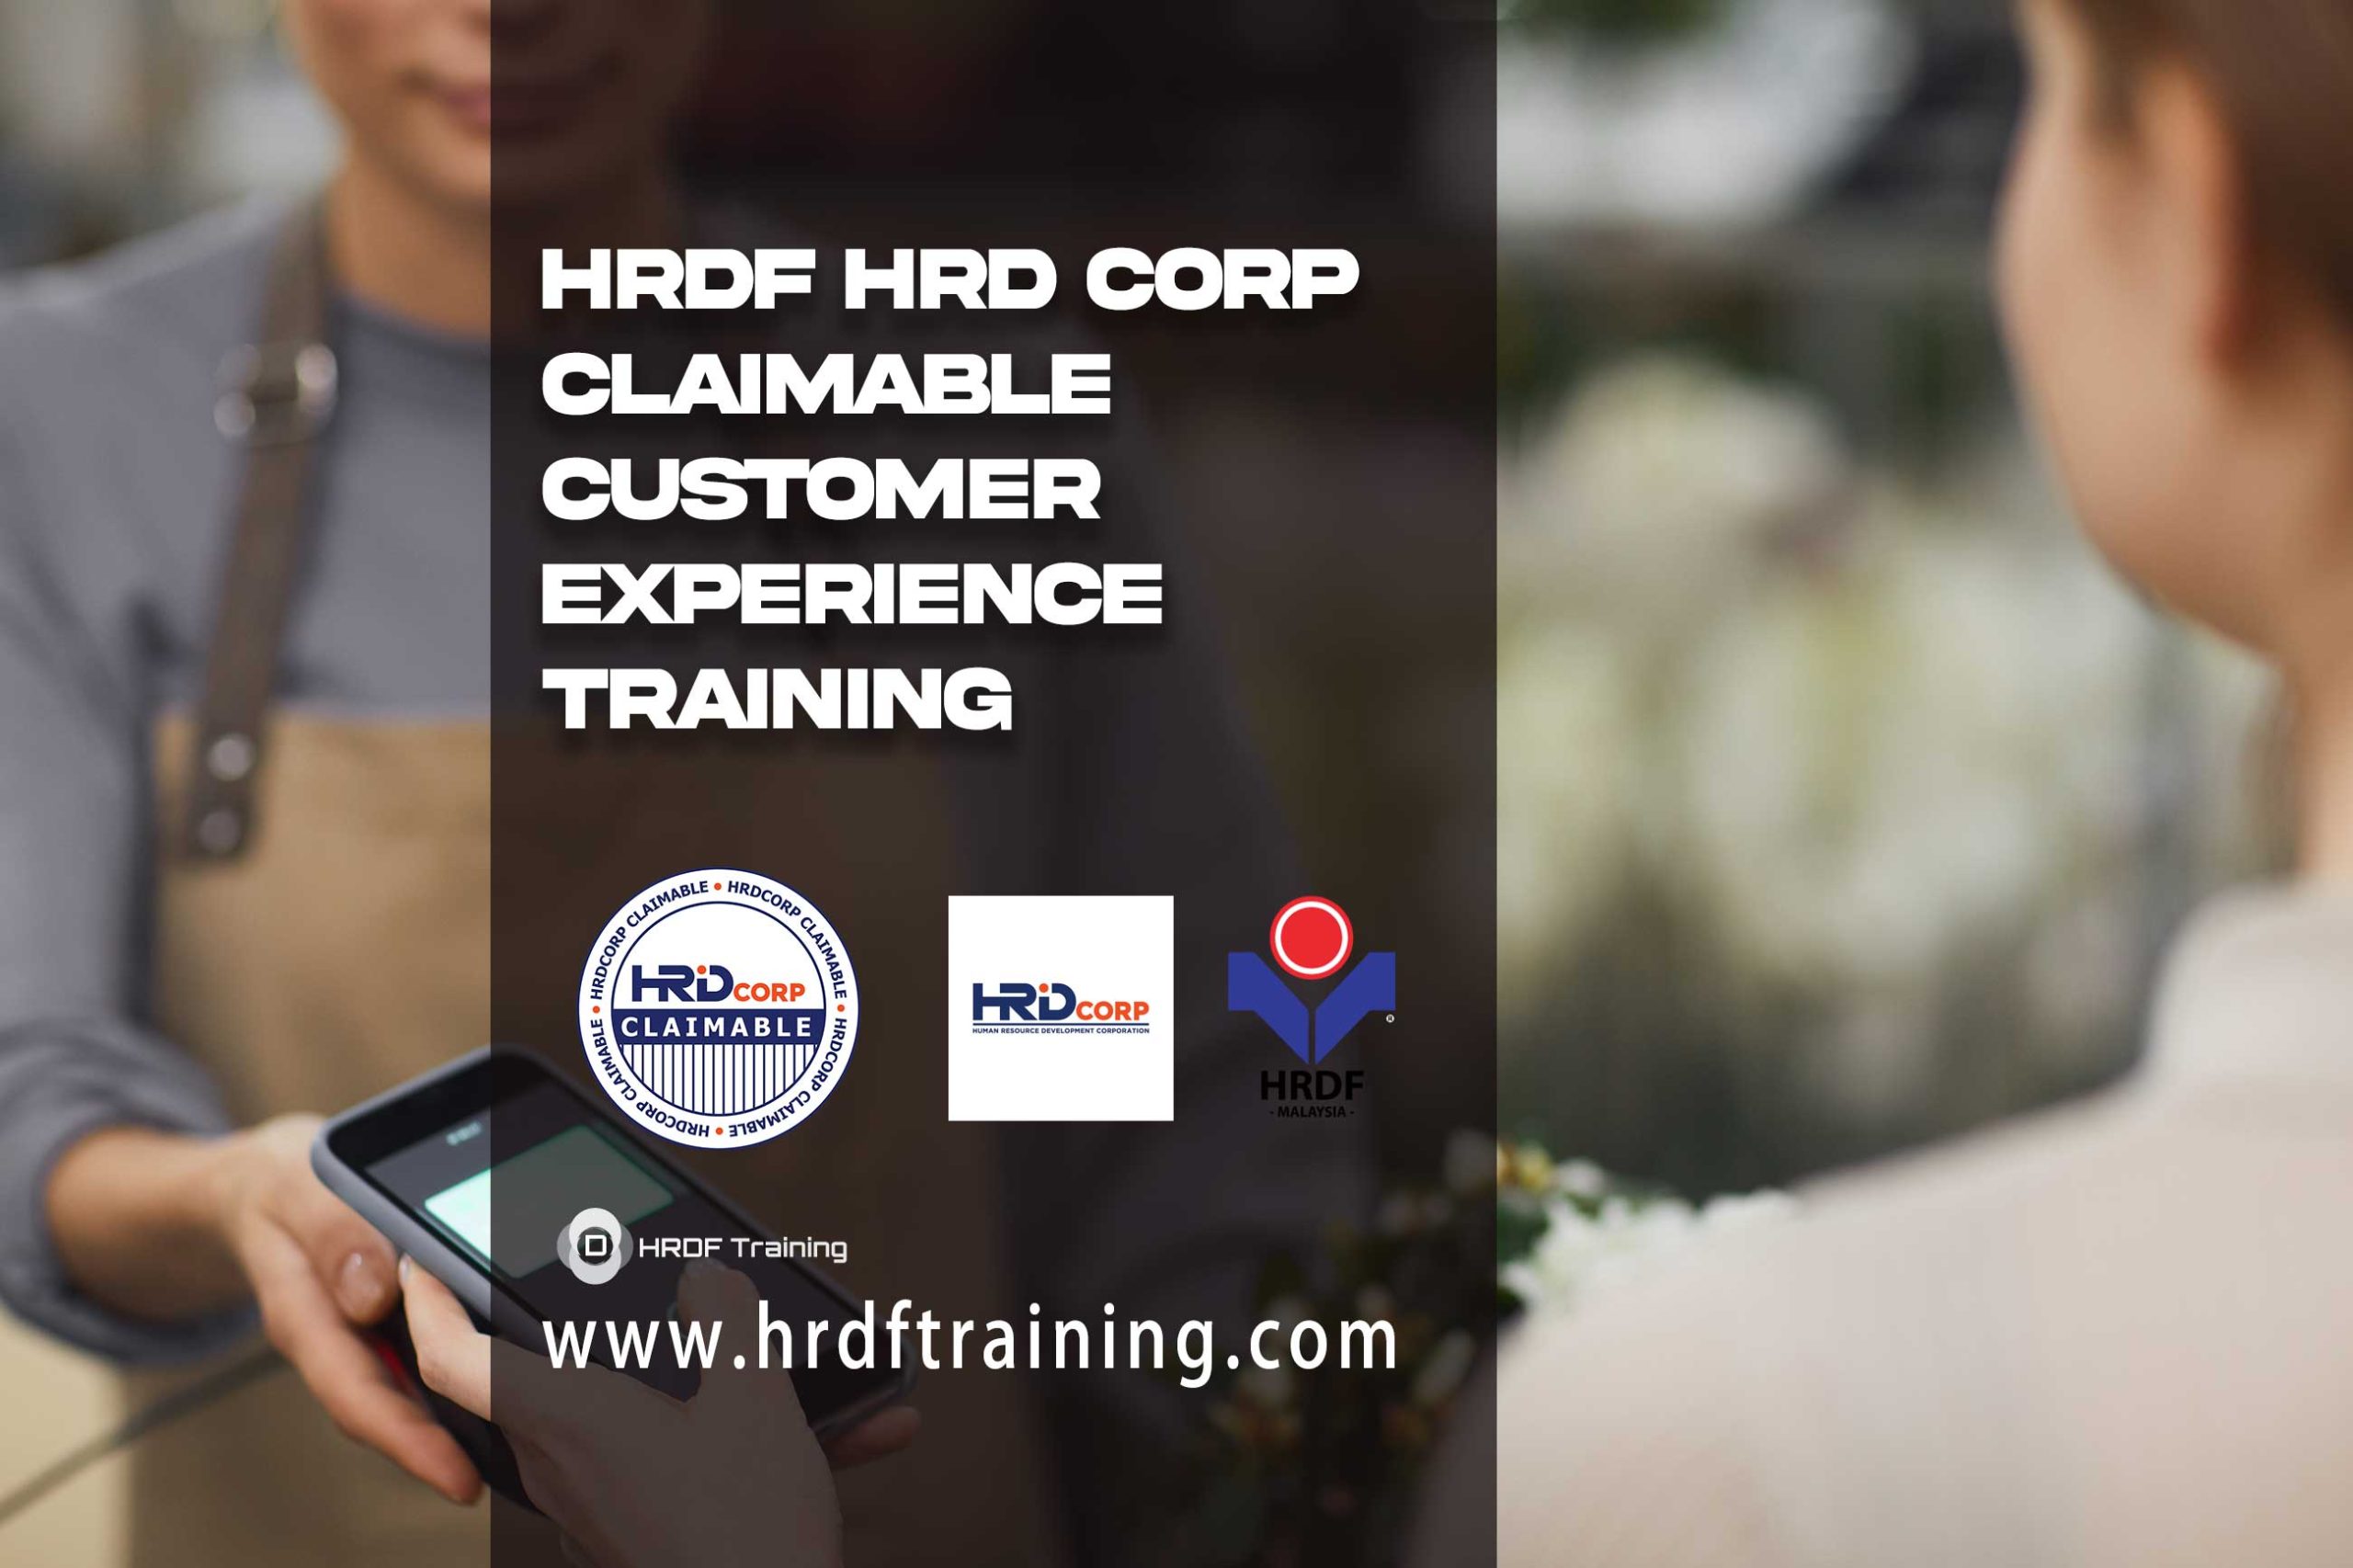 HRDF-HRD-Corp-Claimable-Customer-Experience-Training